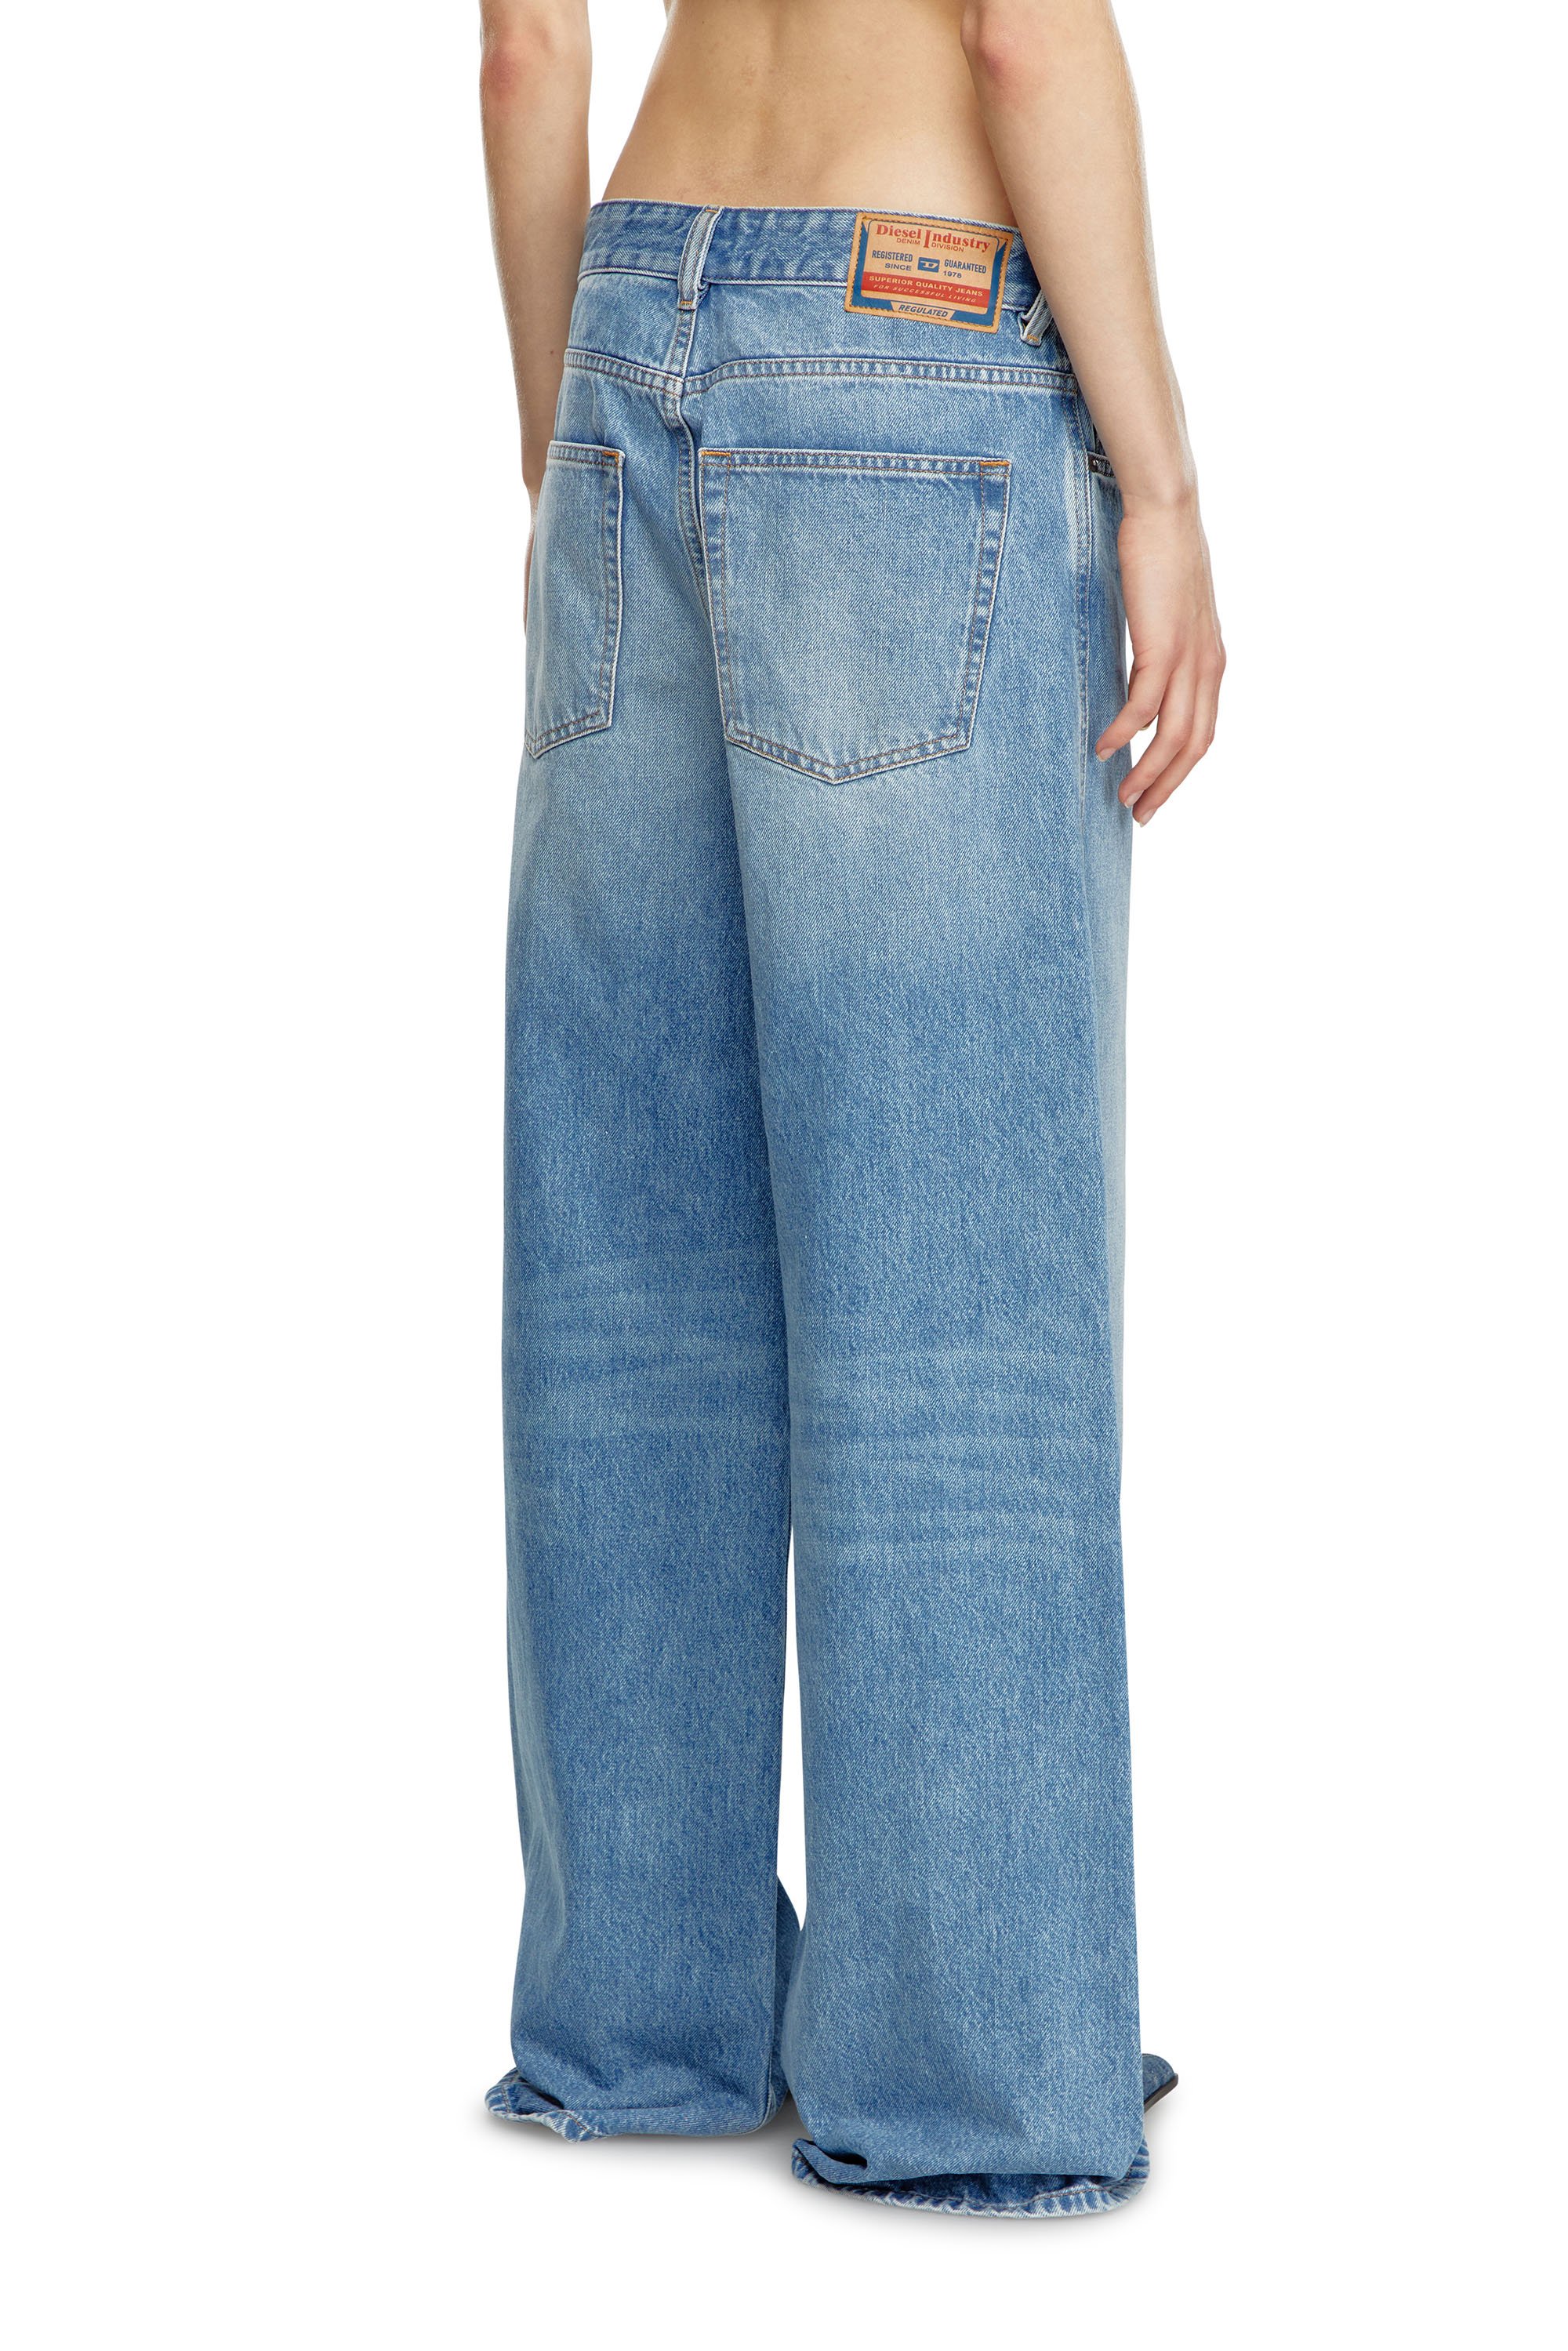 Diesel - Straight Jeans 1996 D-Sire 09I29, Mujer Straight Jeans - 1996 D-Sire in Azul marino - Image 4